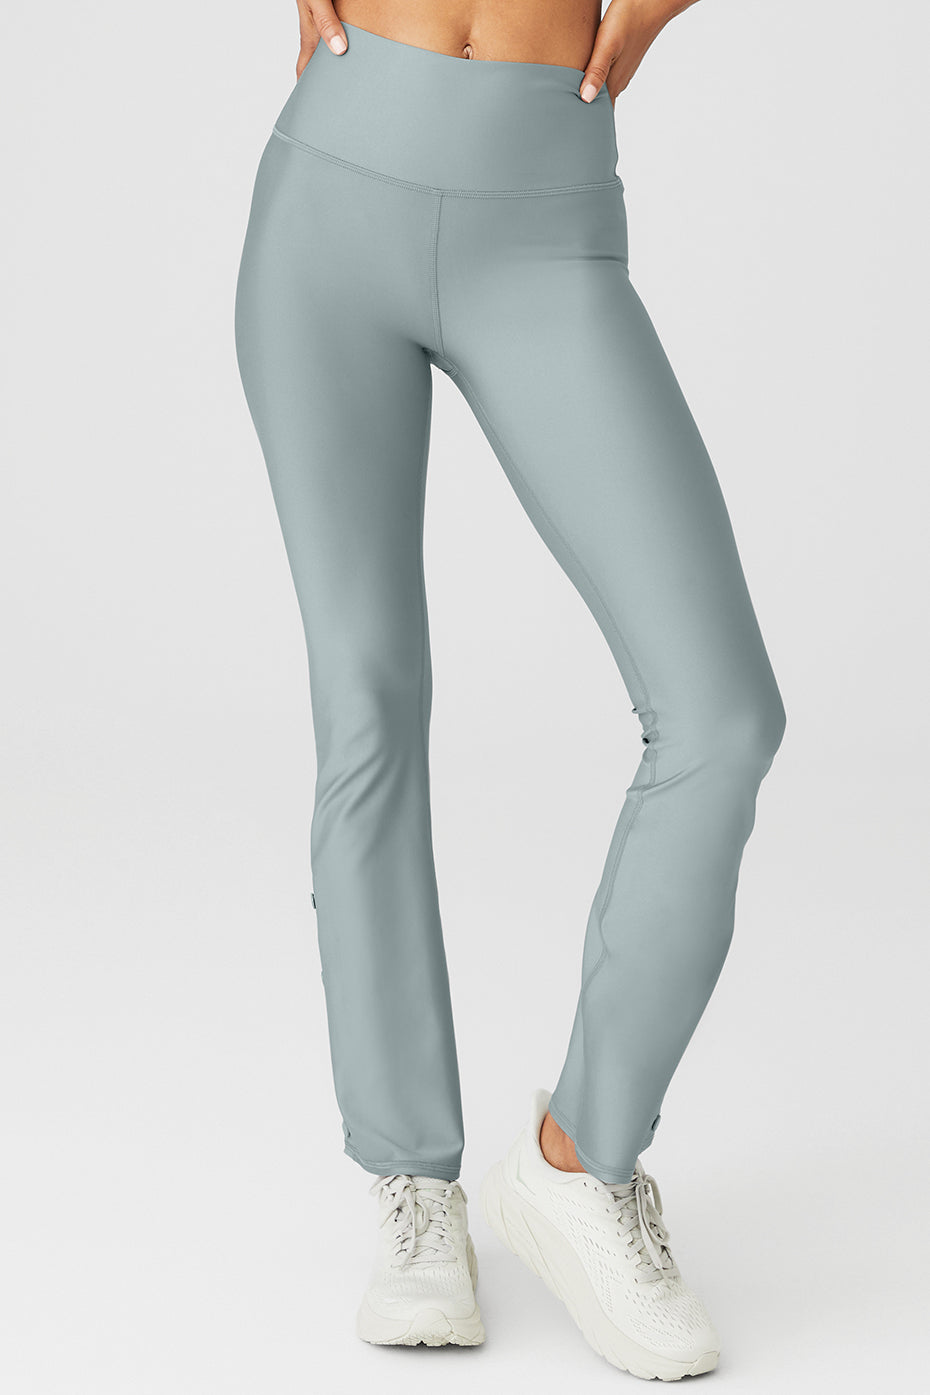 ALO 7/8 HIGH WAIST AIRLIFT LEGGING IN INFINITY BLUE NEW!! – Bubble